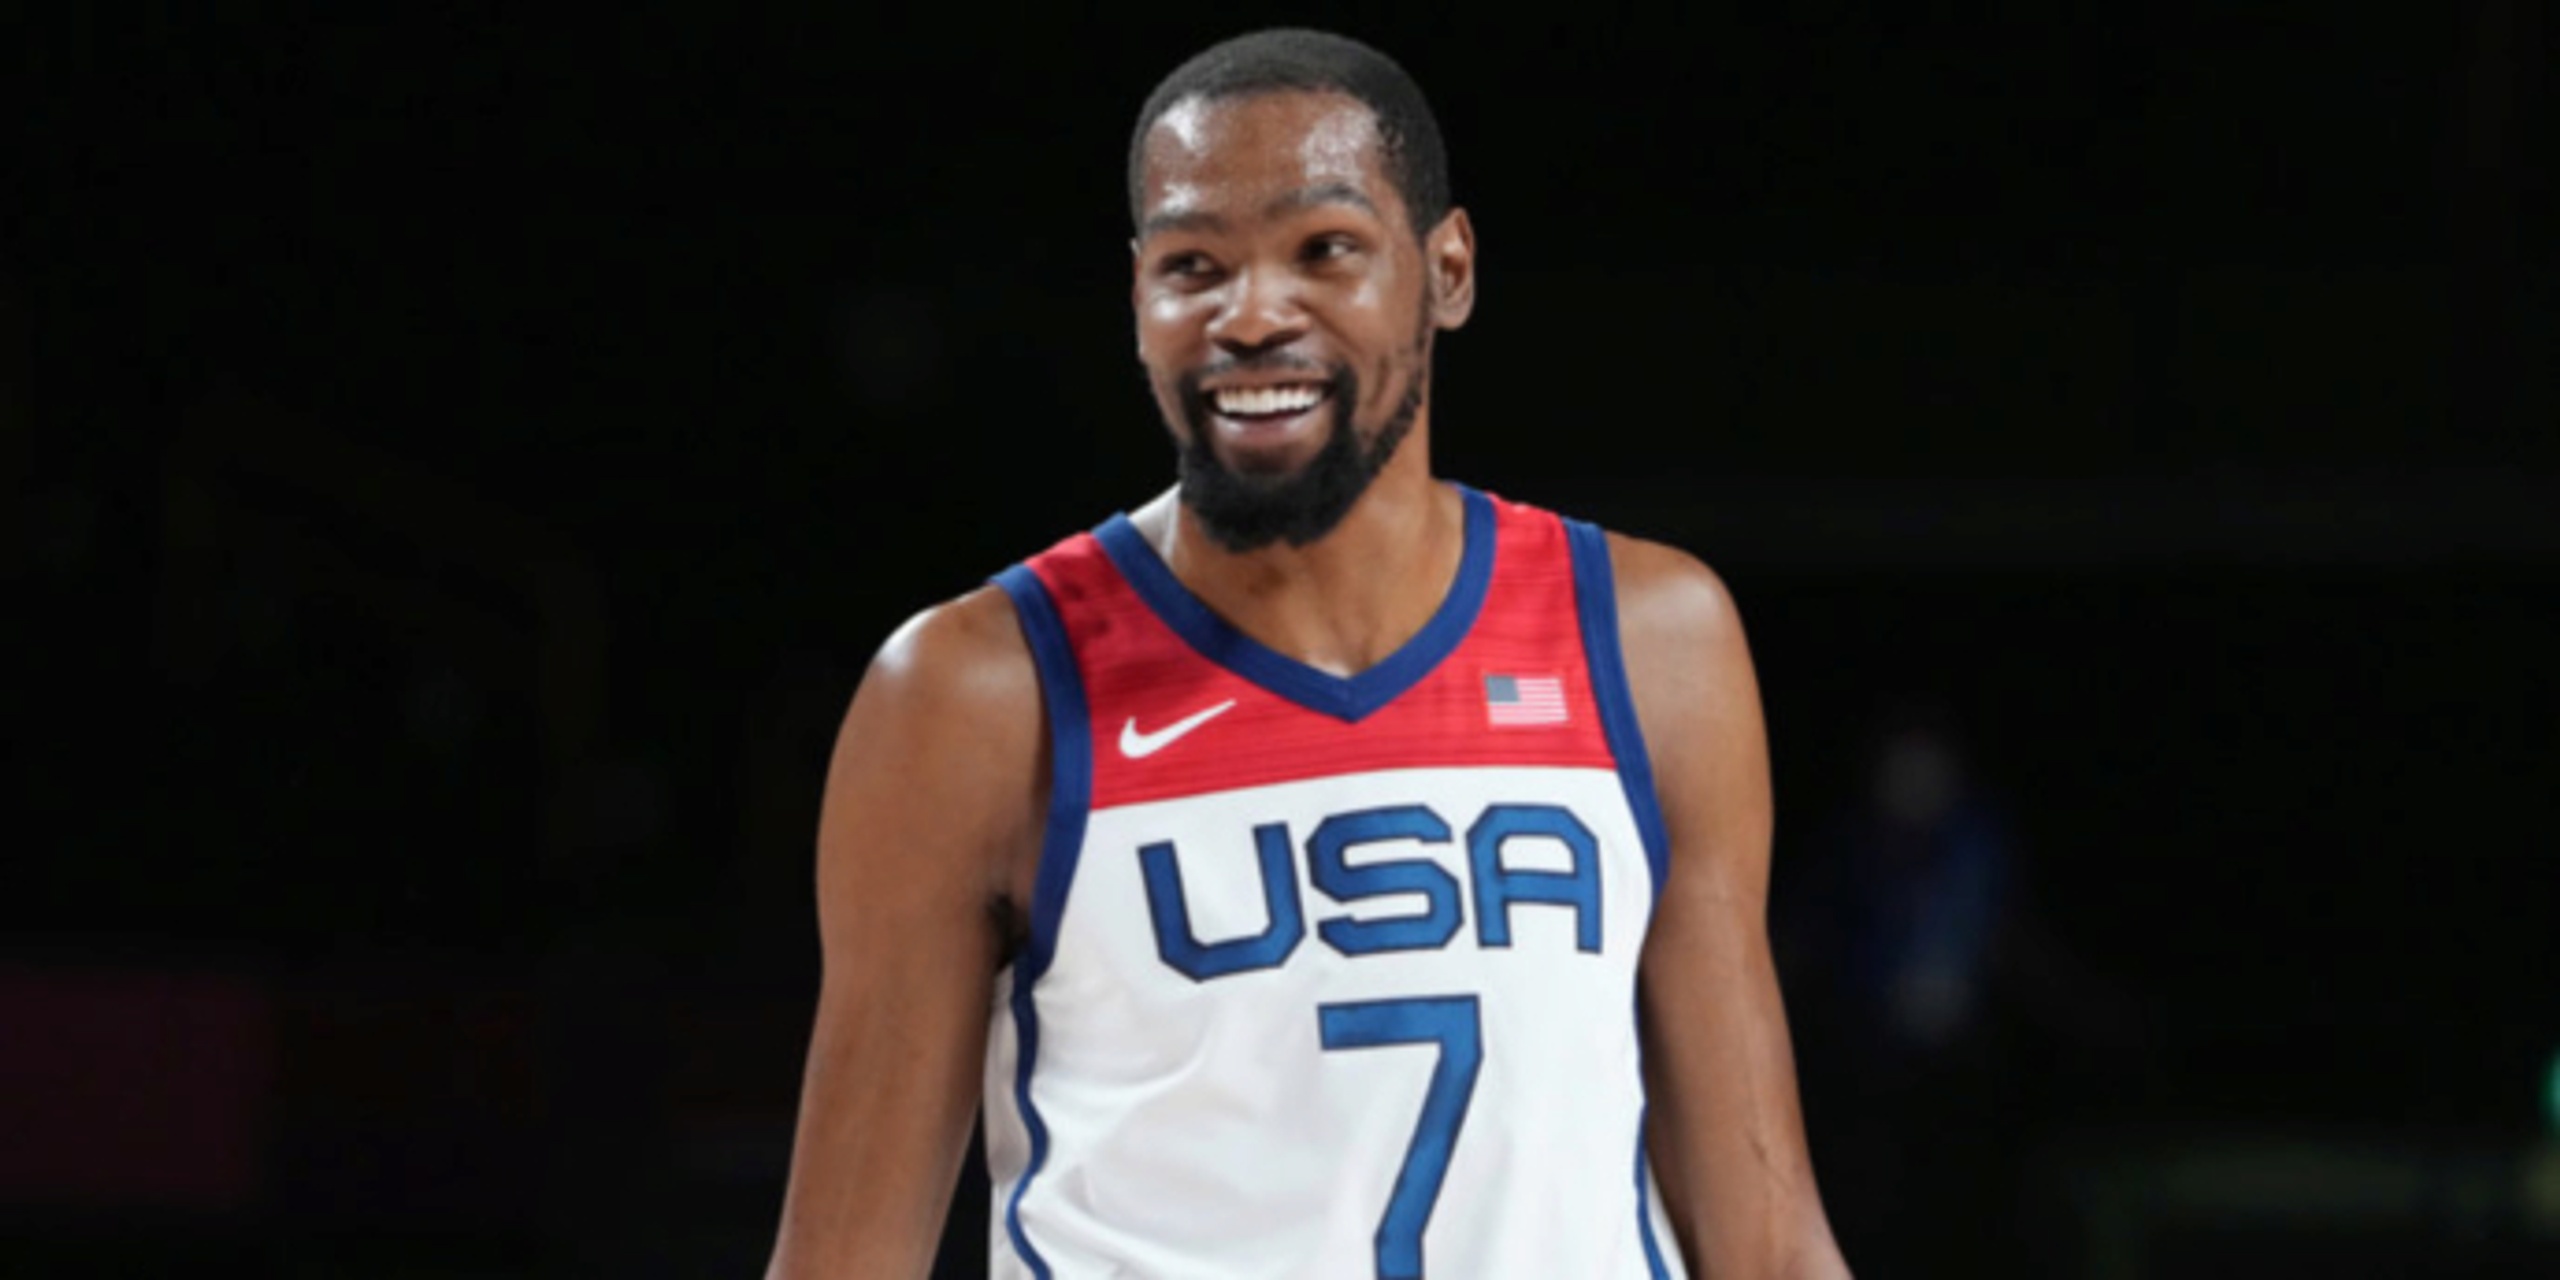 Kevin Durant is USA's all-time leading scorer, passing Carmelo Anthony